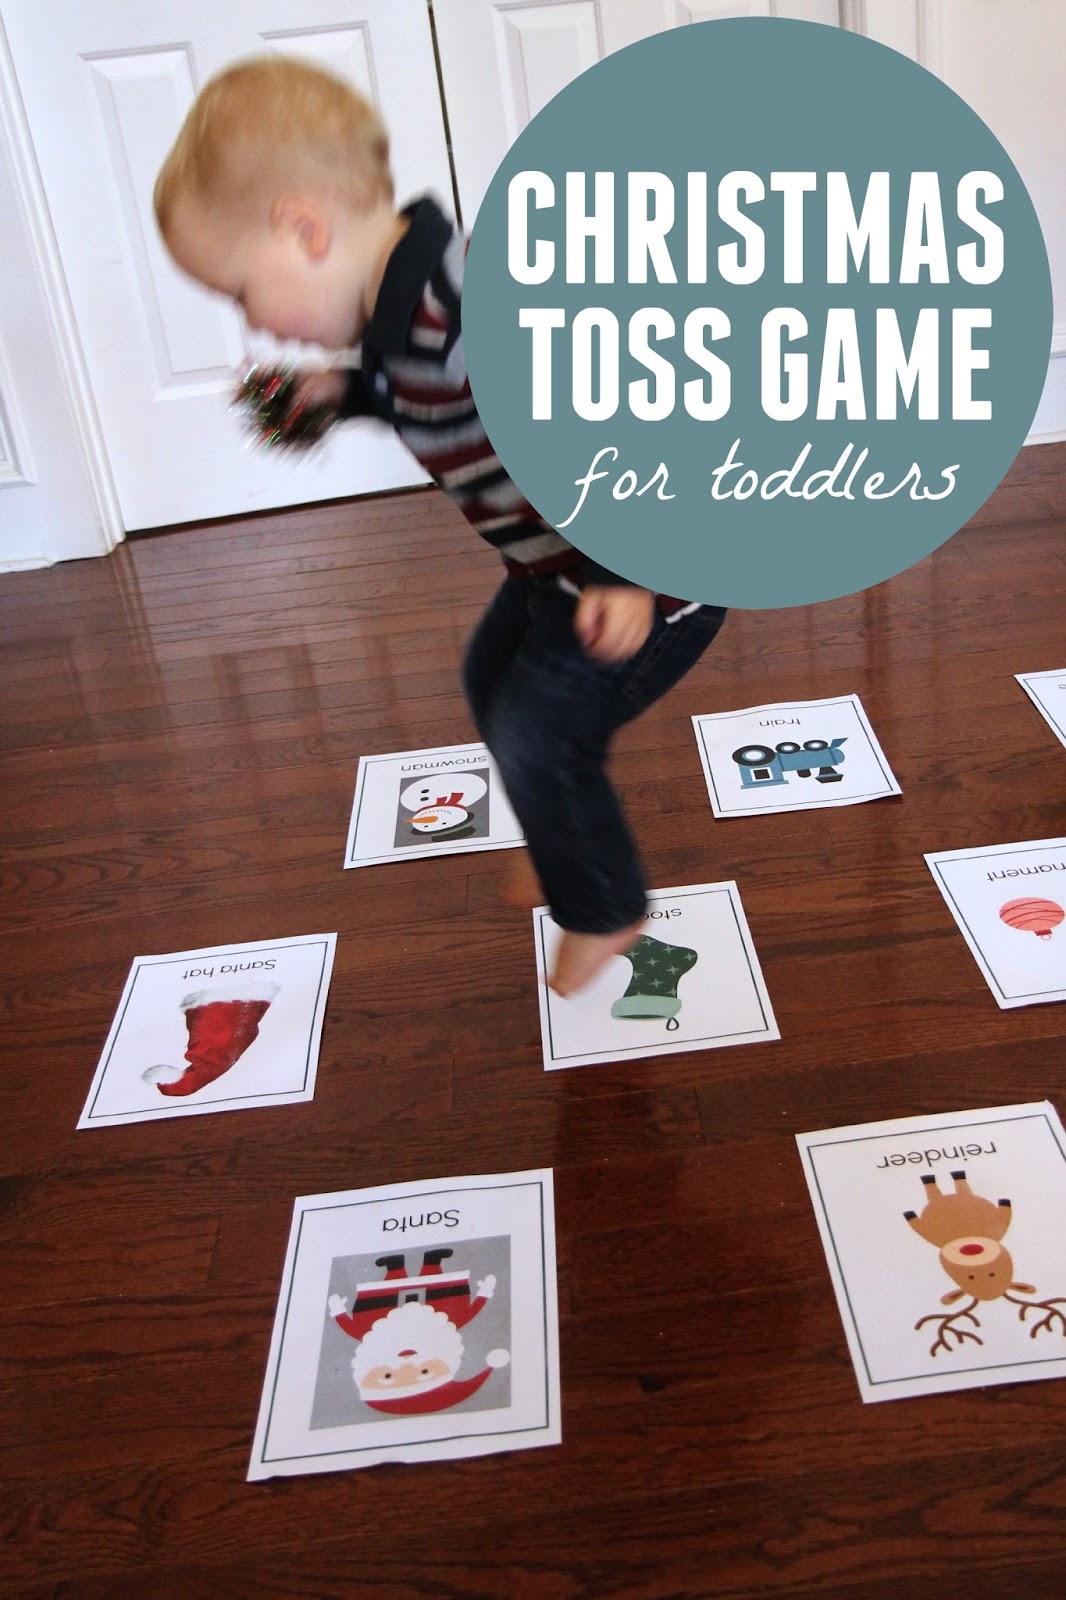 area-budaya-toddler-approved-christmas-toss-game-for-toddlers